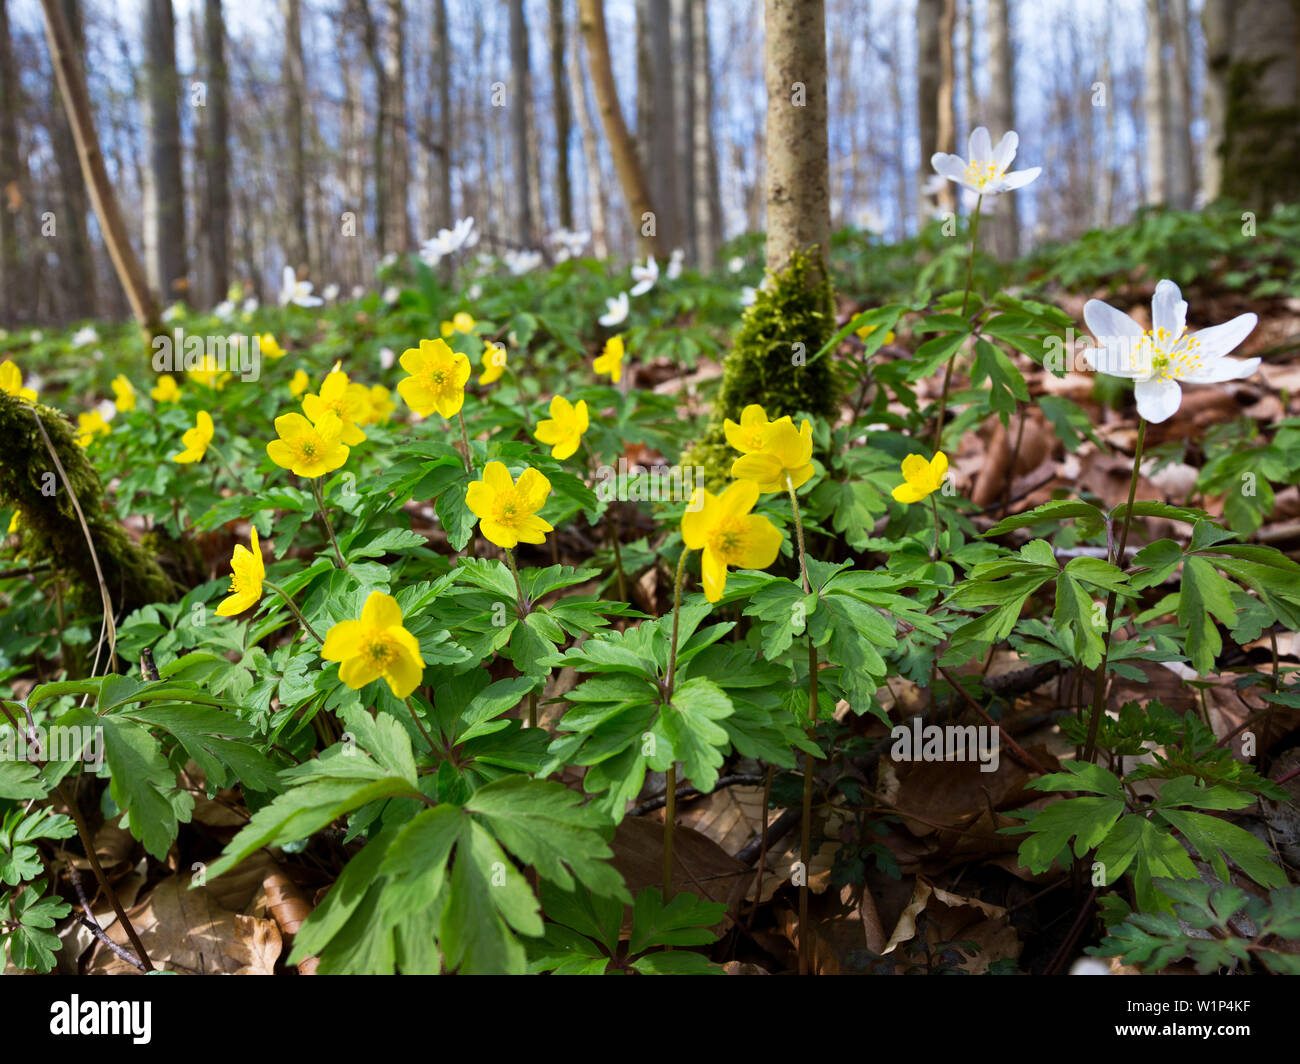 Yellow anemones in beech forest in spring, Anemone ranunculoides, Anemone nemorosa, Hainich National Park, Thuringia, Germany, Europe Stock Photo